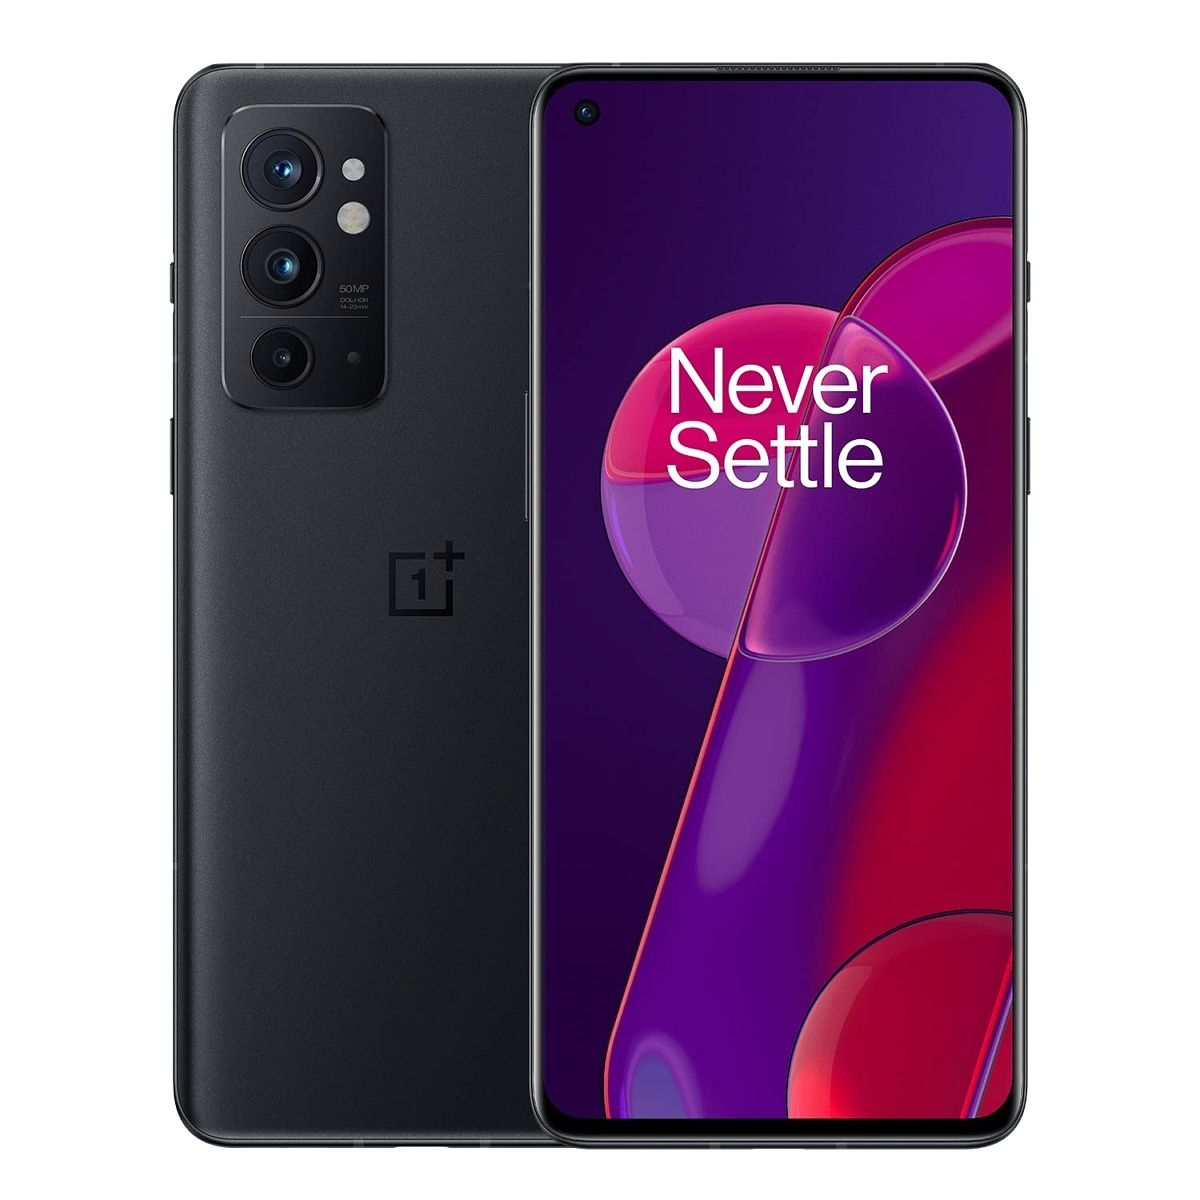 The OnePlus 9RT is powered by Qualcomm's Snapdragon 888 chip and runs ColorOS 12 (based on Android 11). It has three rear cameras and a stunning front-facing one.